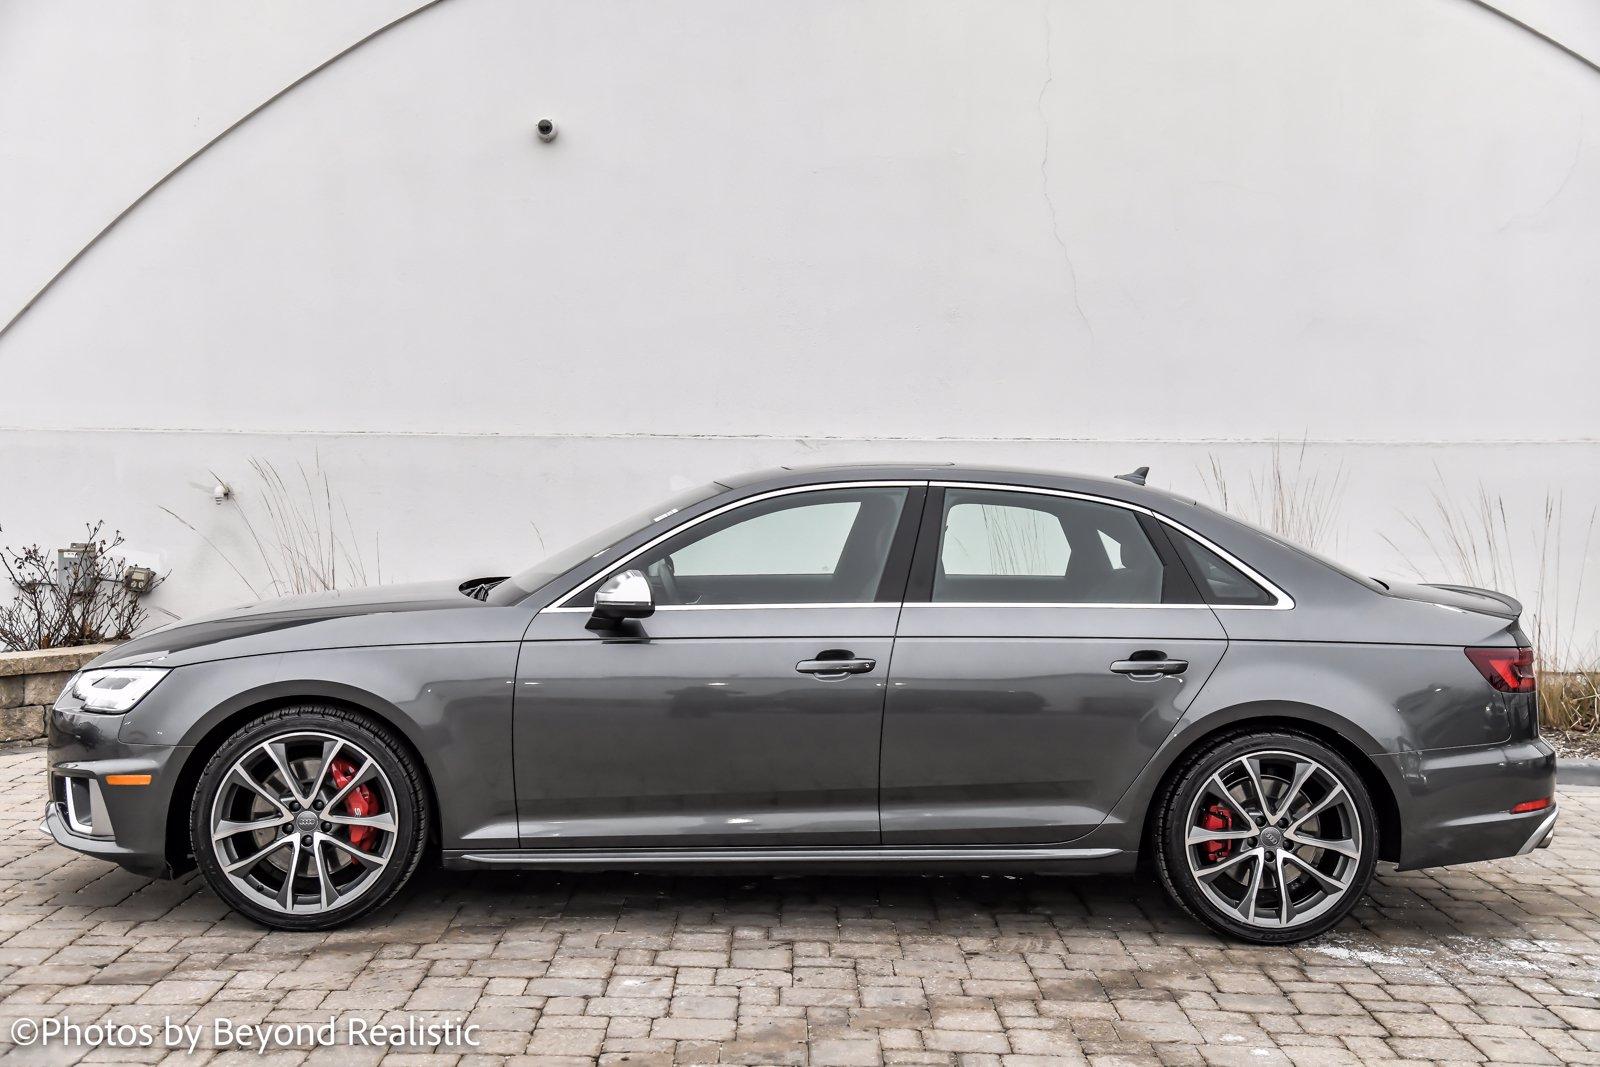 Used 2019 Audi S4 Premium Plus S-Sport With Navigation | Downers Grove, IL